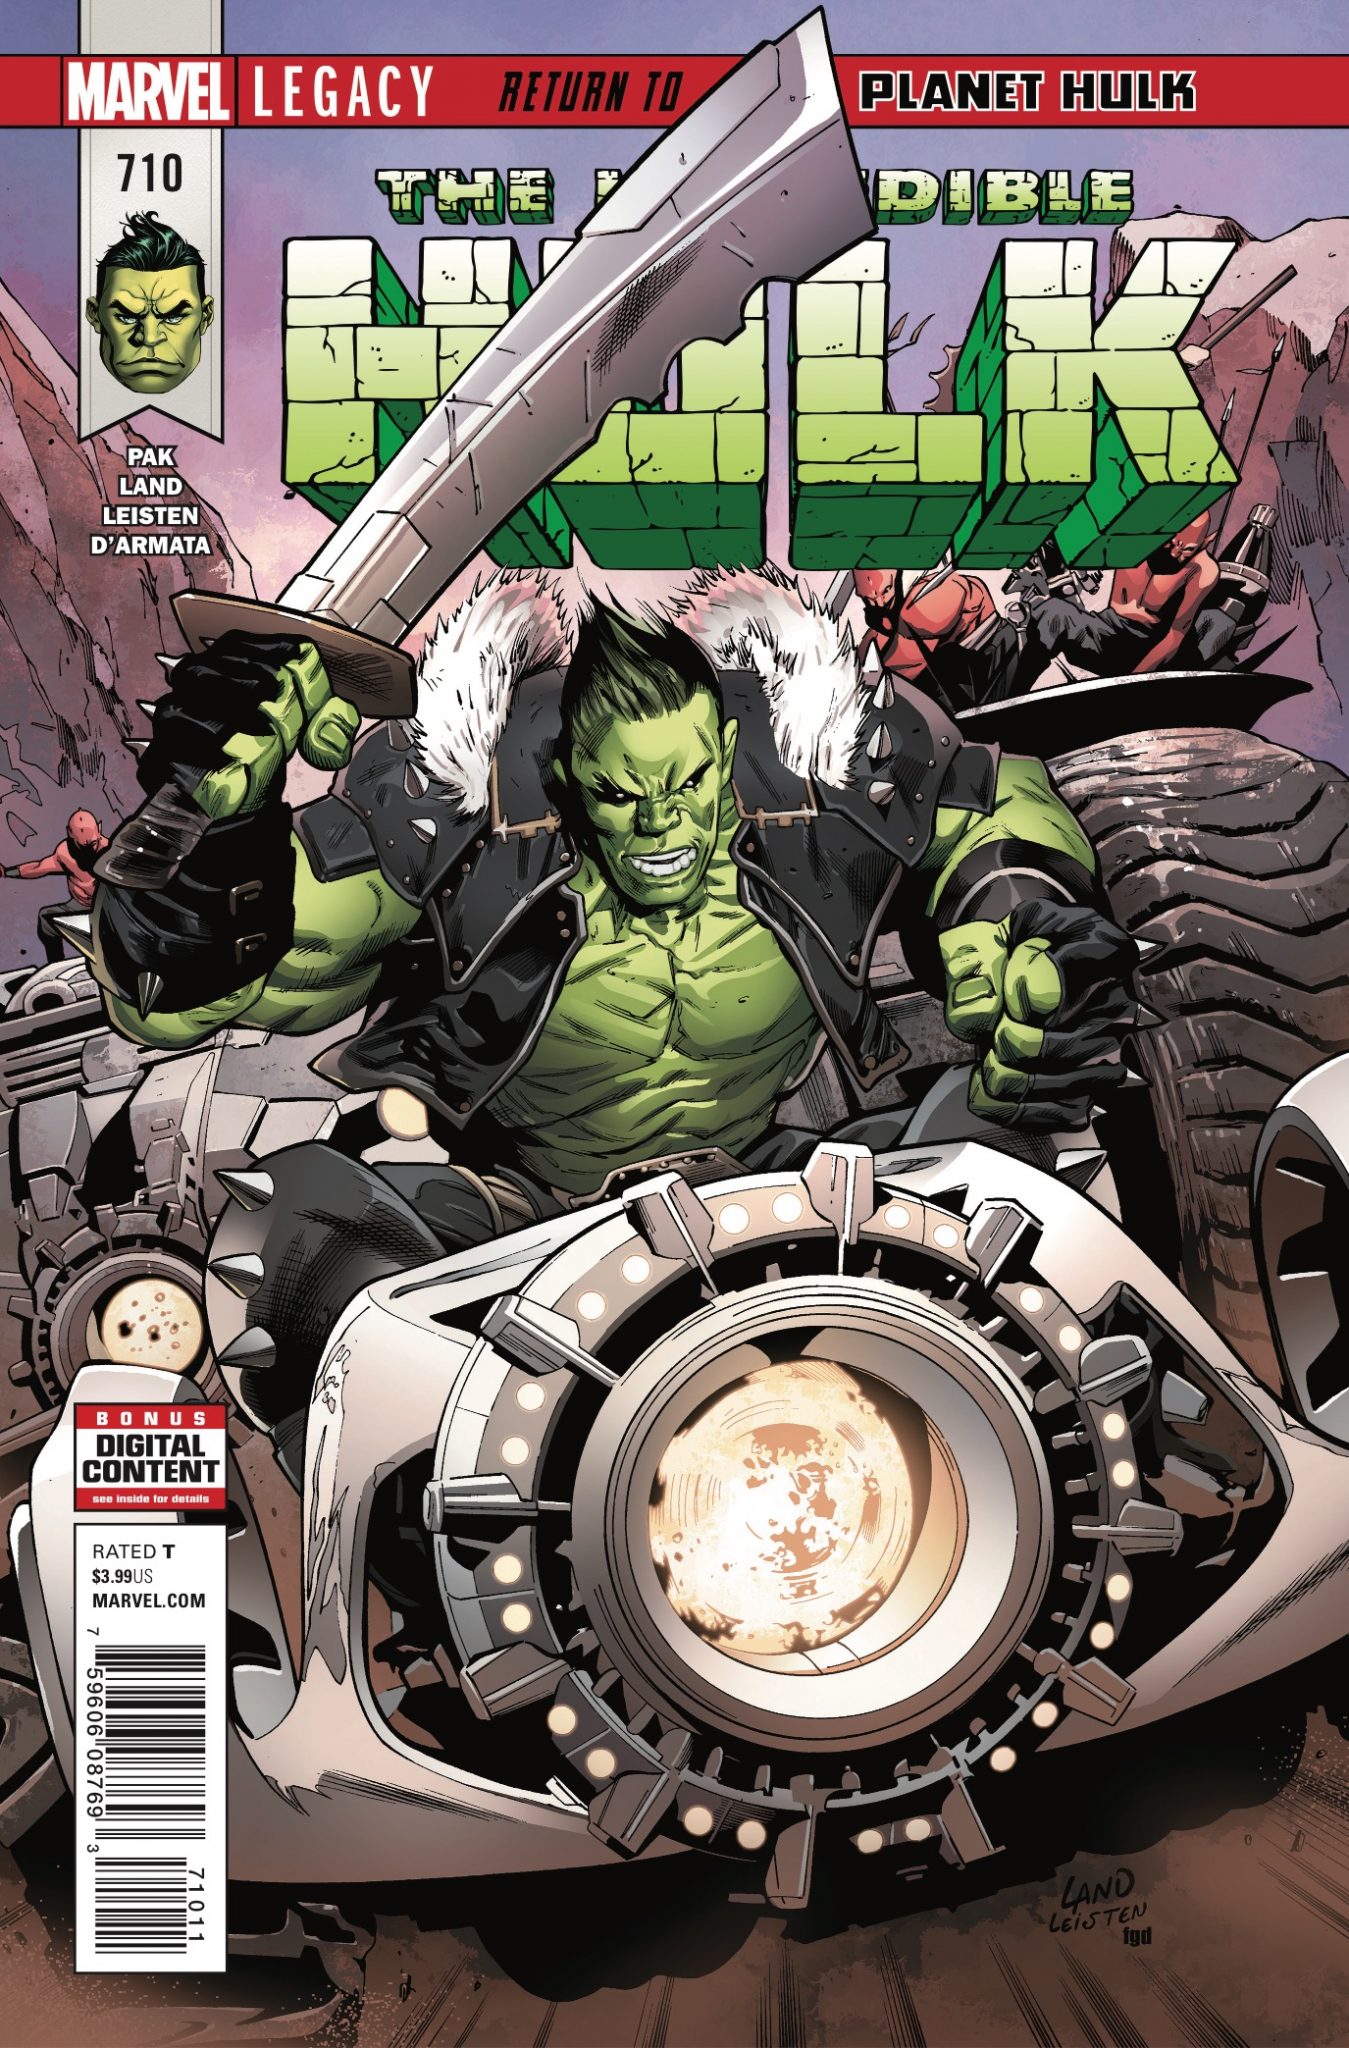 Marvel Preview: The Incredible Hulk #710